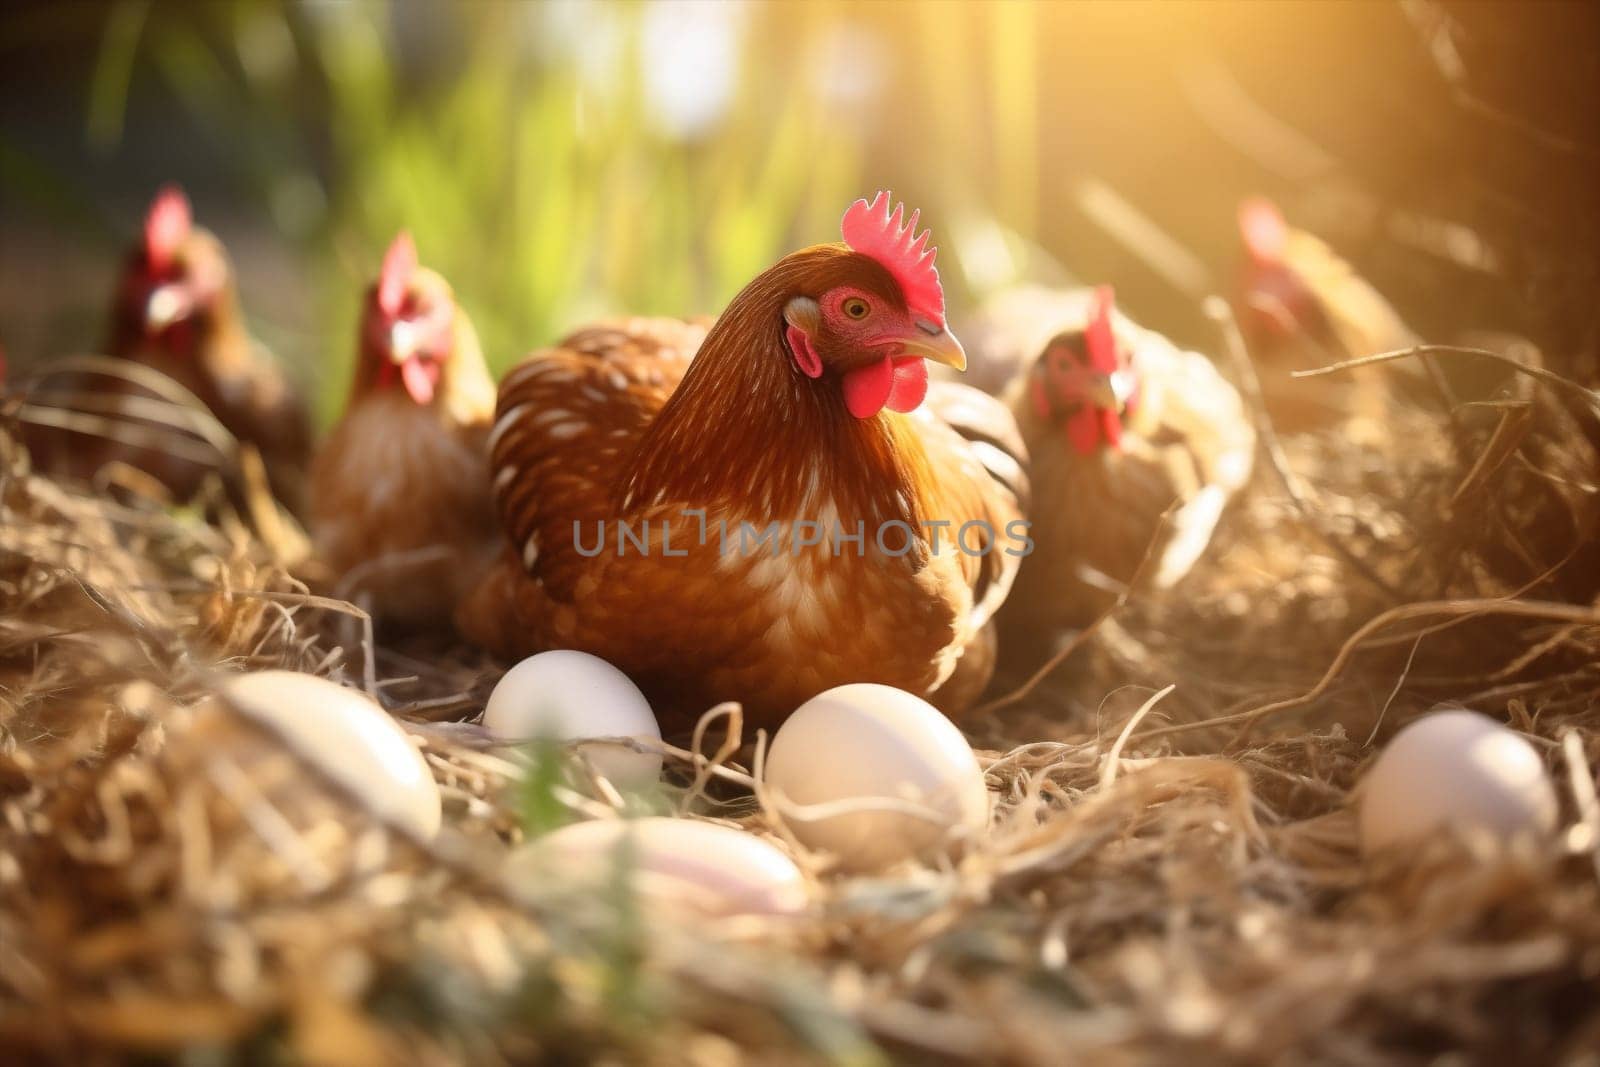 Chick egg nature bird chicken farming hen fowl organic poultry rural food agriculture by Vichizh